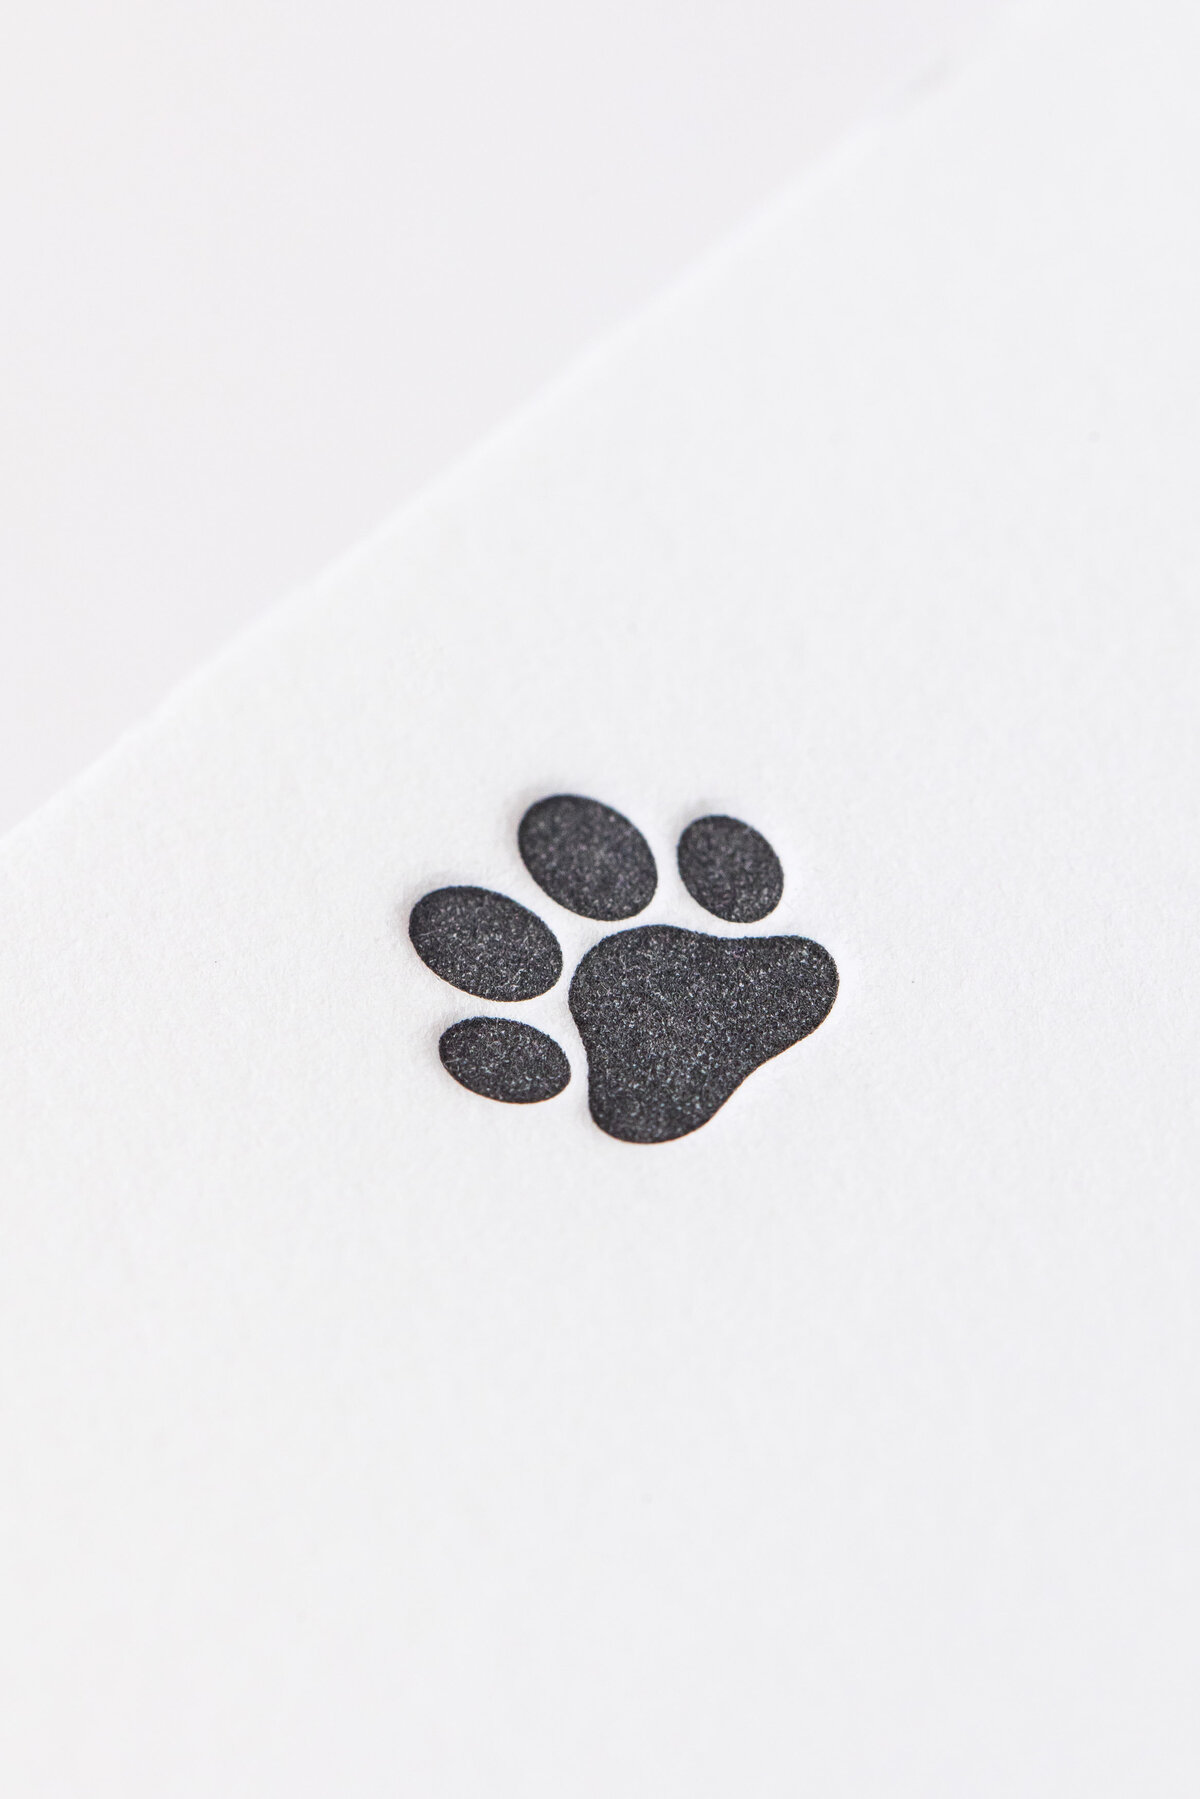 a close up of a paw print stamped on paper